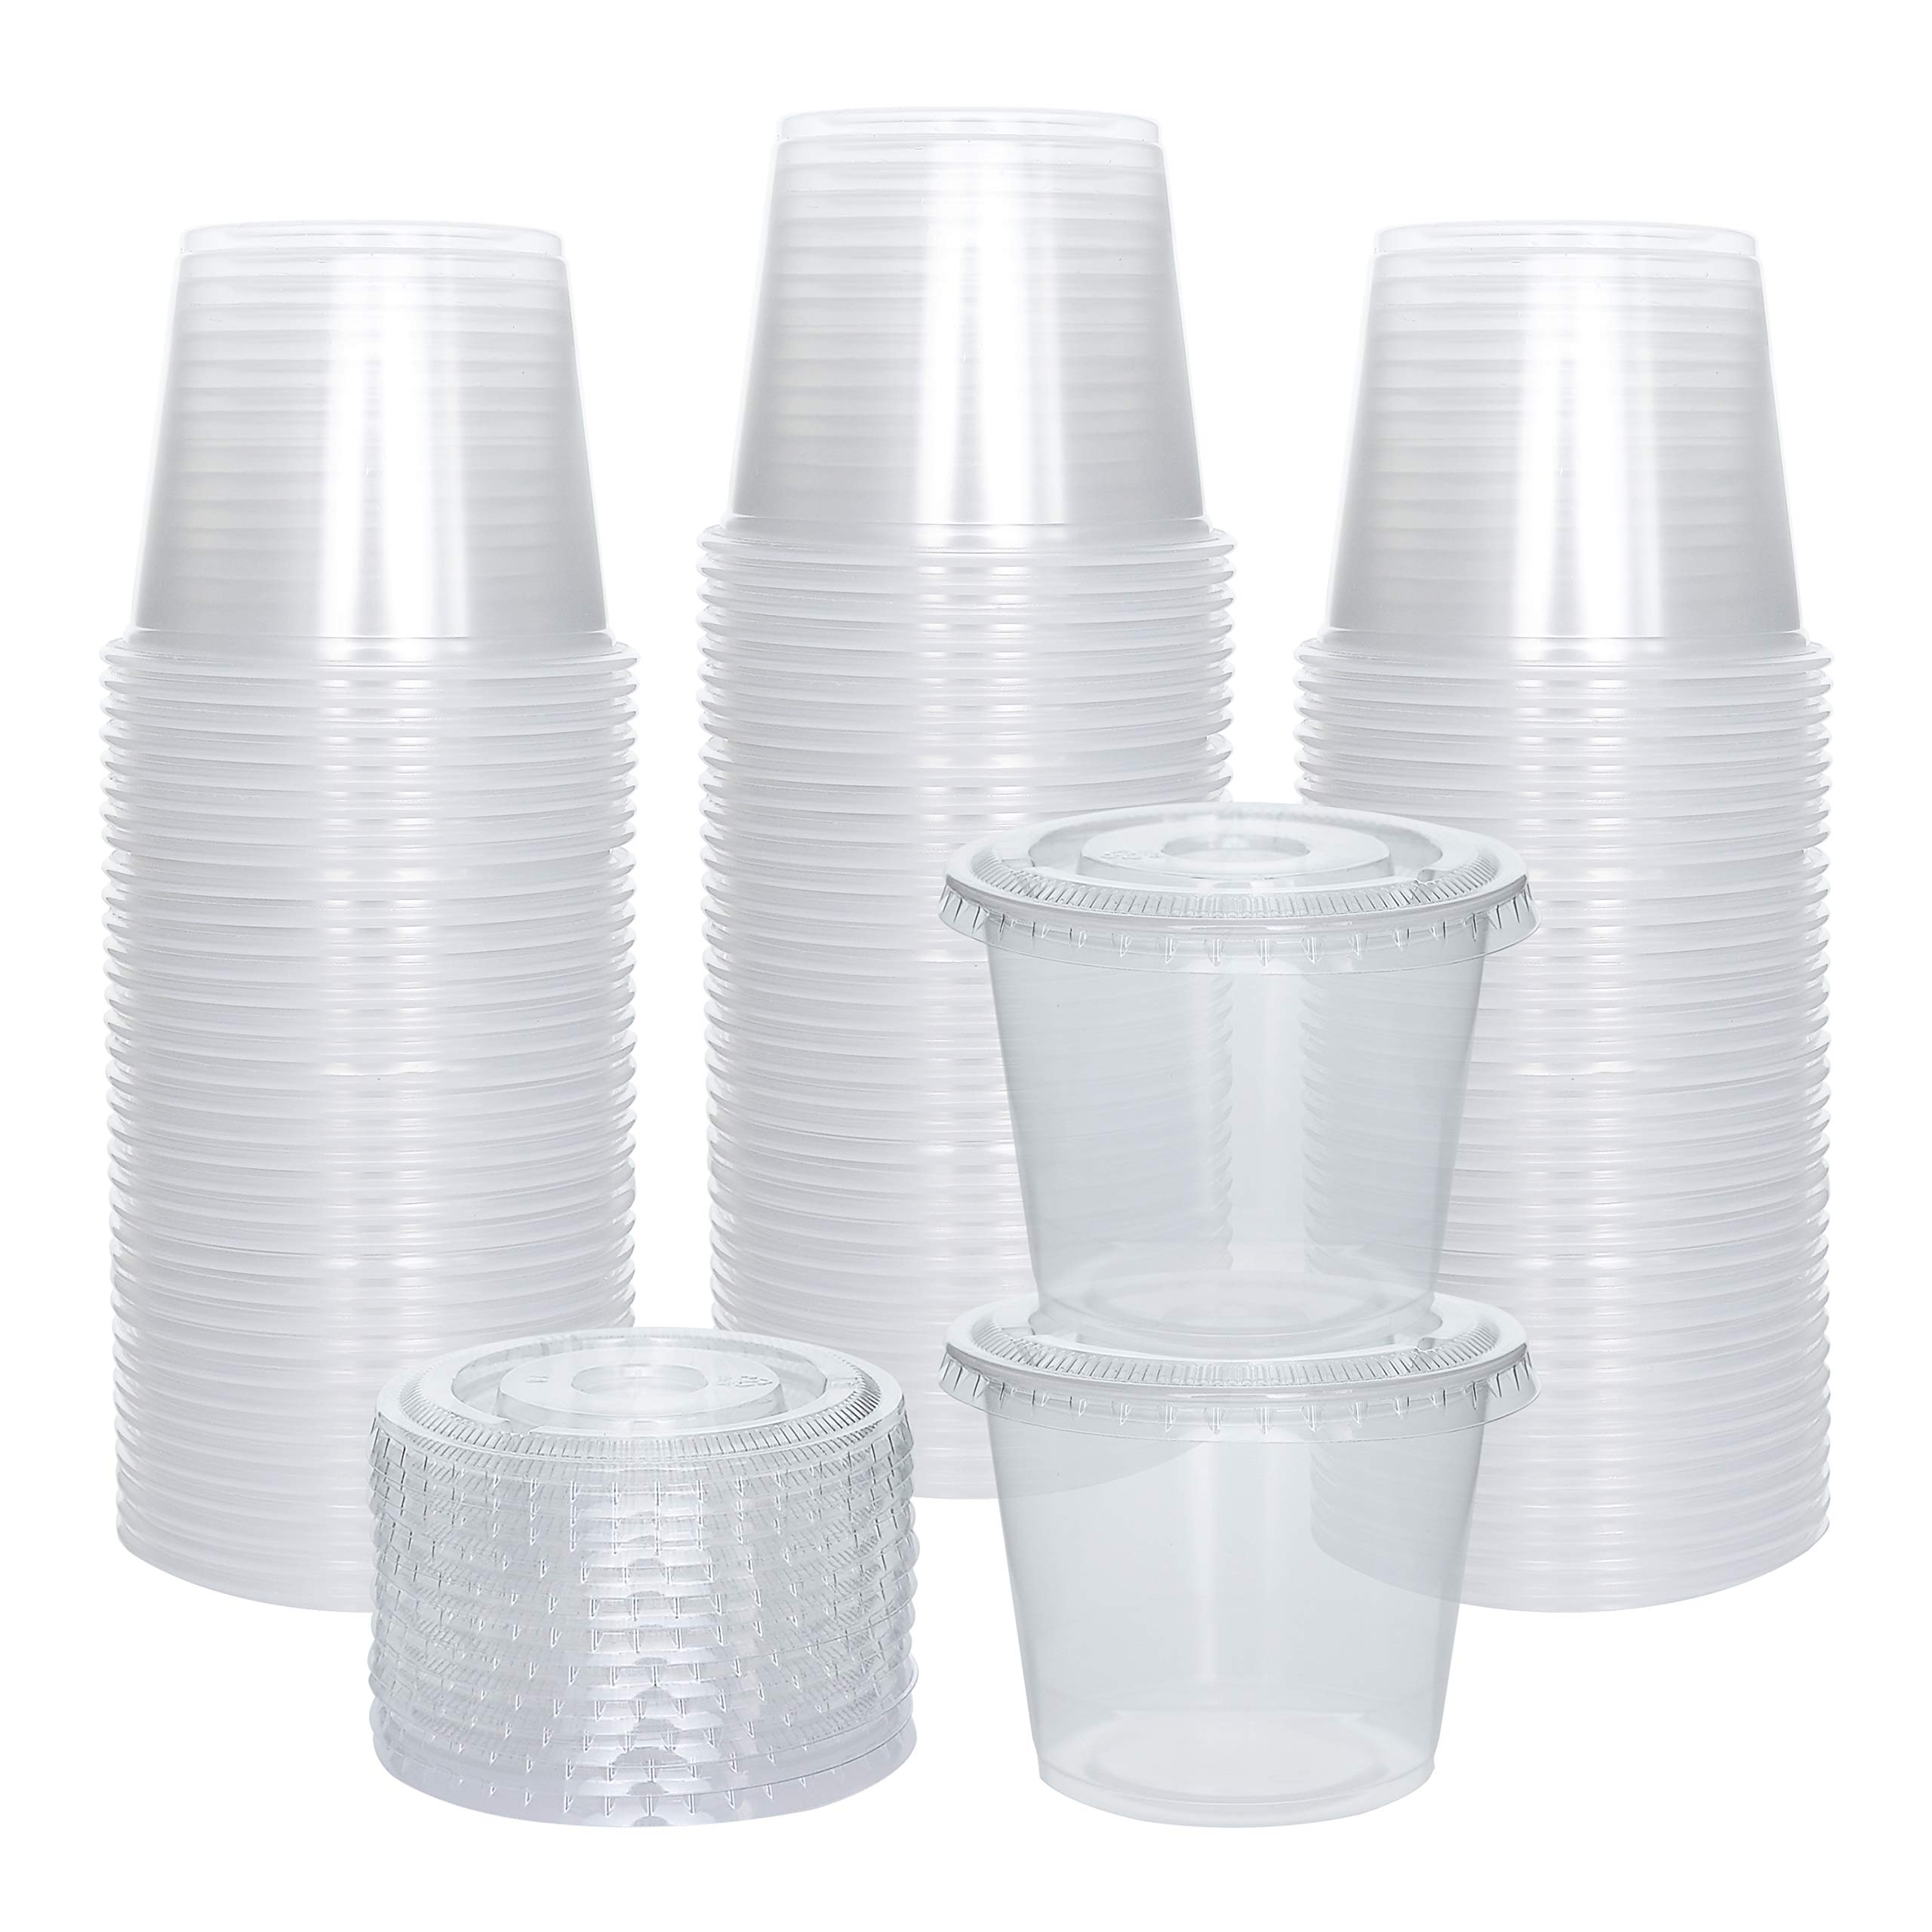 condiment containers to go, condiment containers to go Suppliers and  Manufacturers at